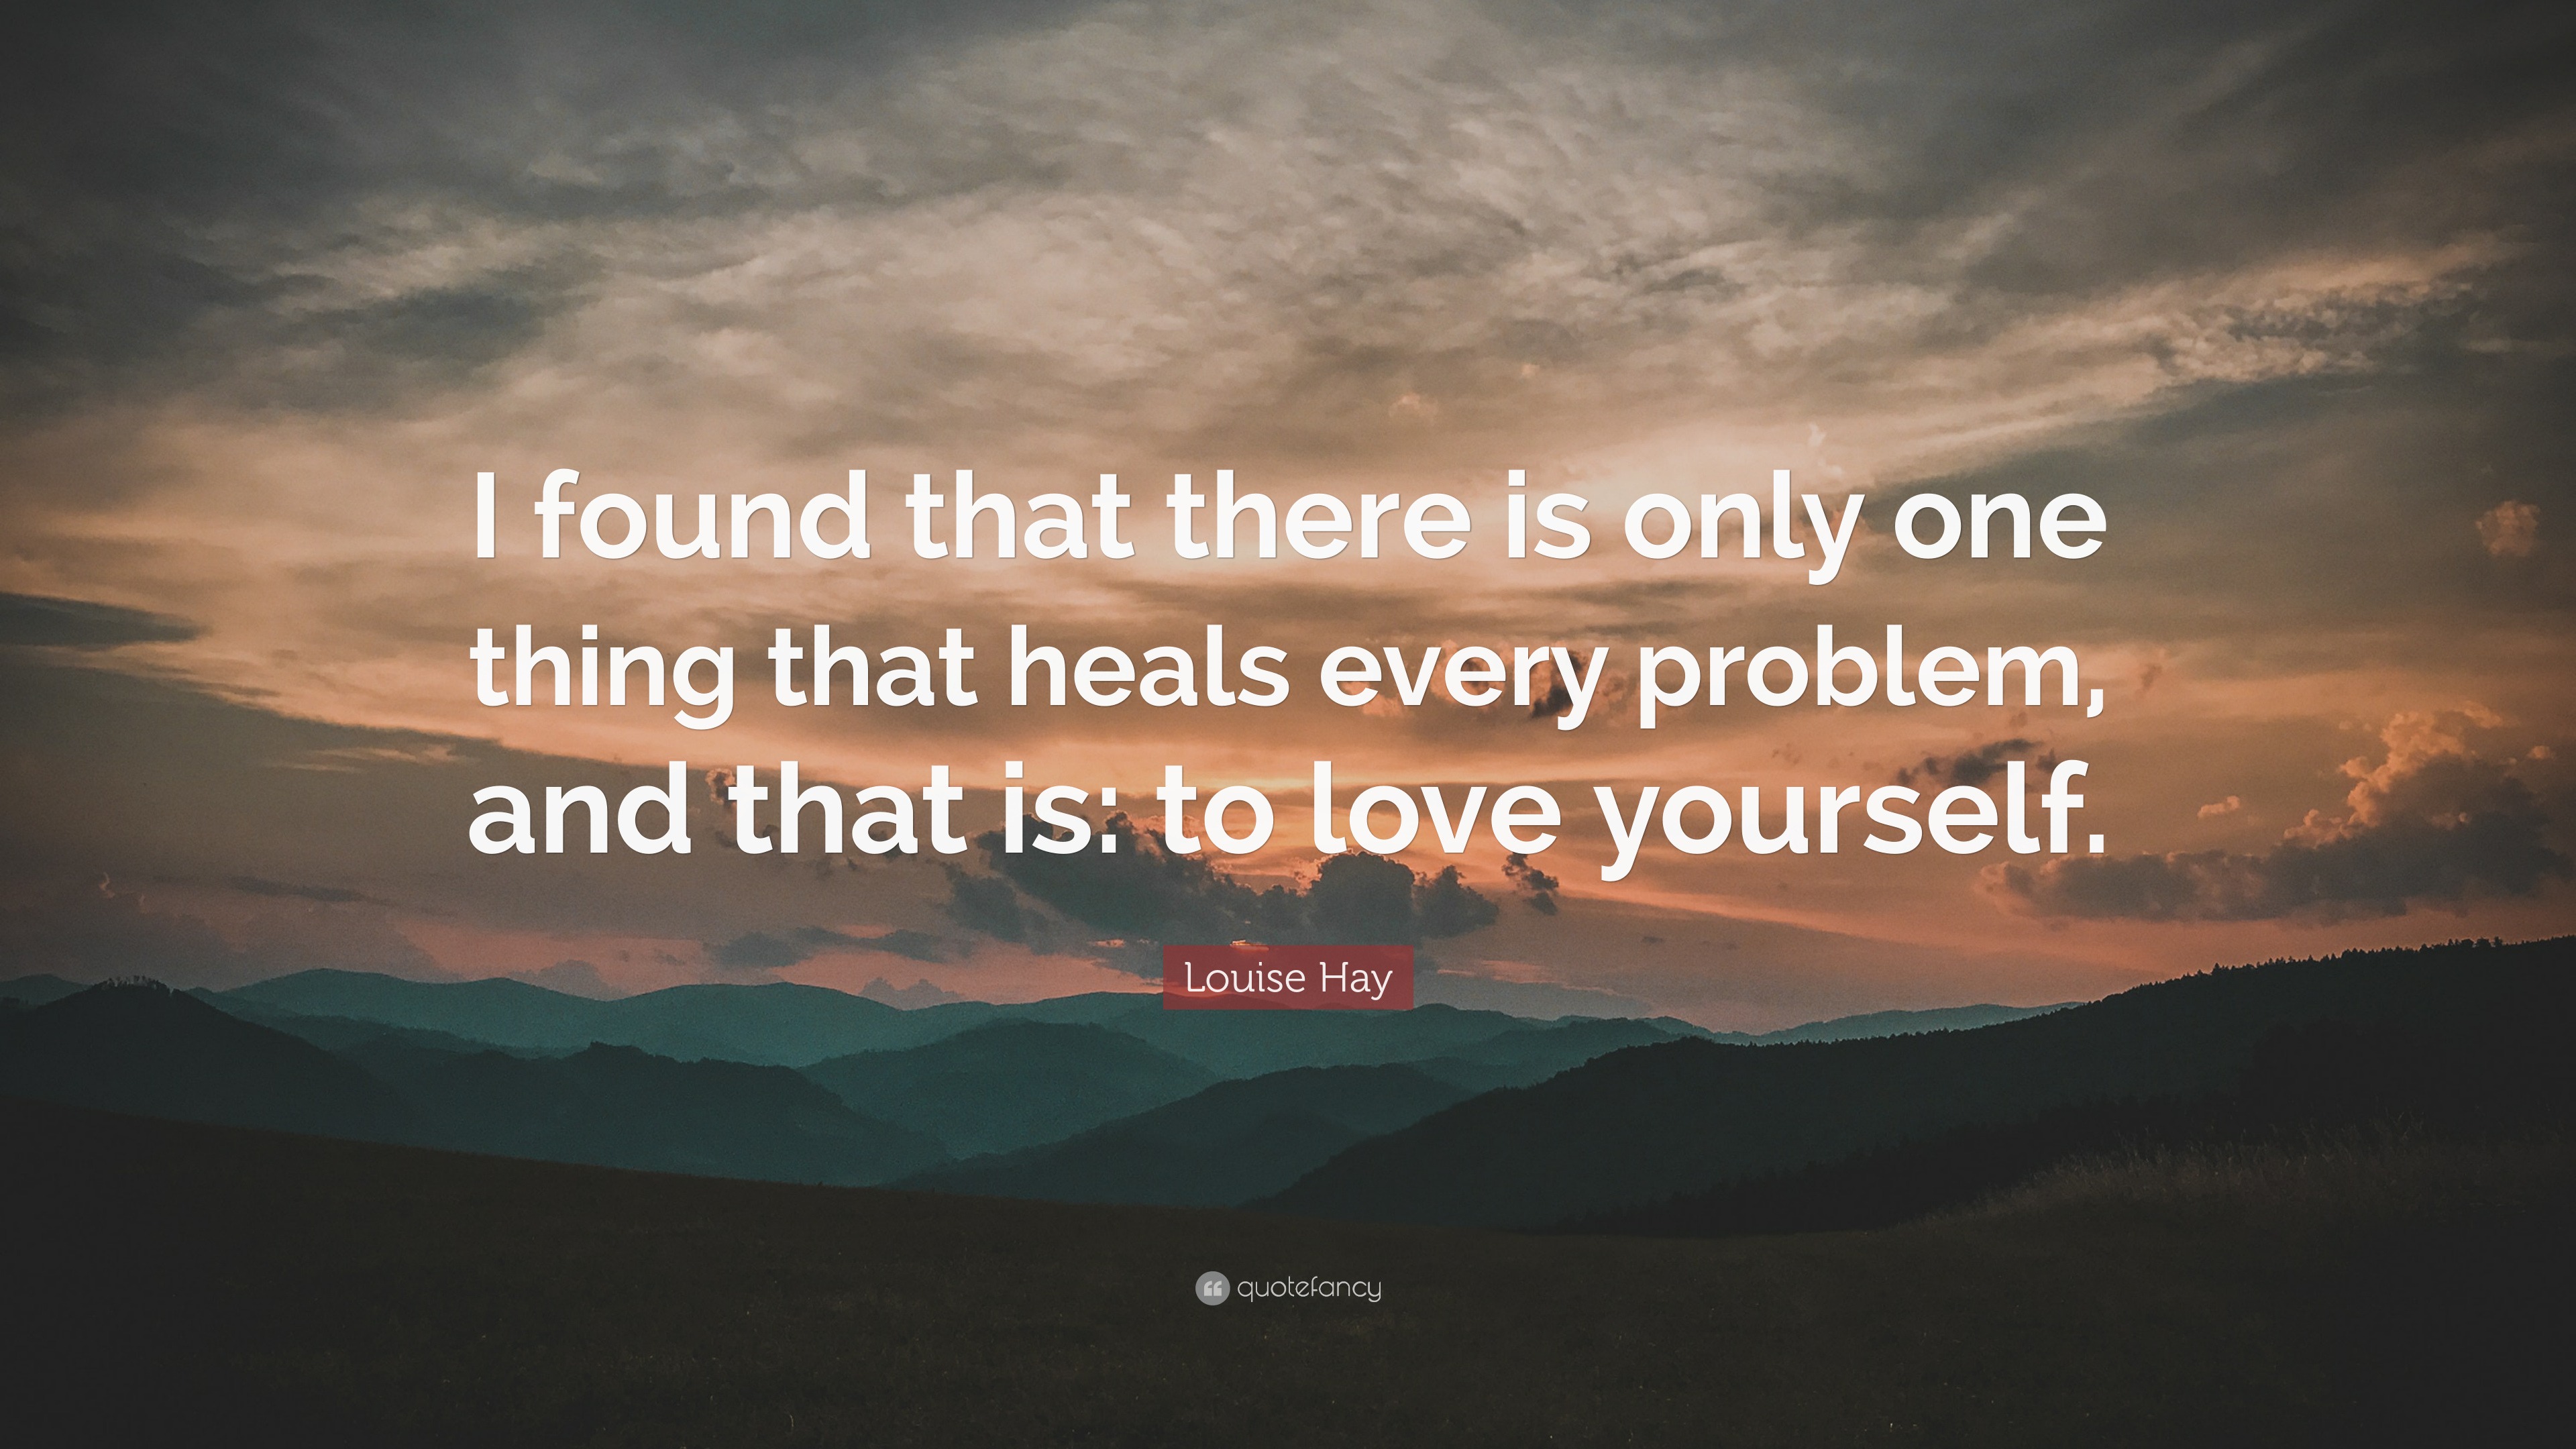 Louise Hay Quote: “I found that there is only one thing that heals ...